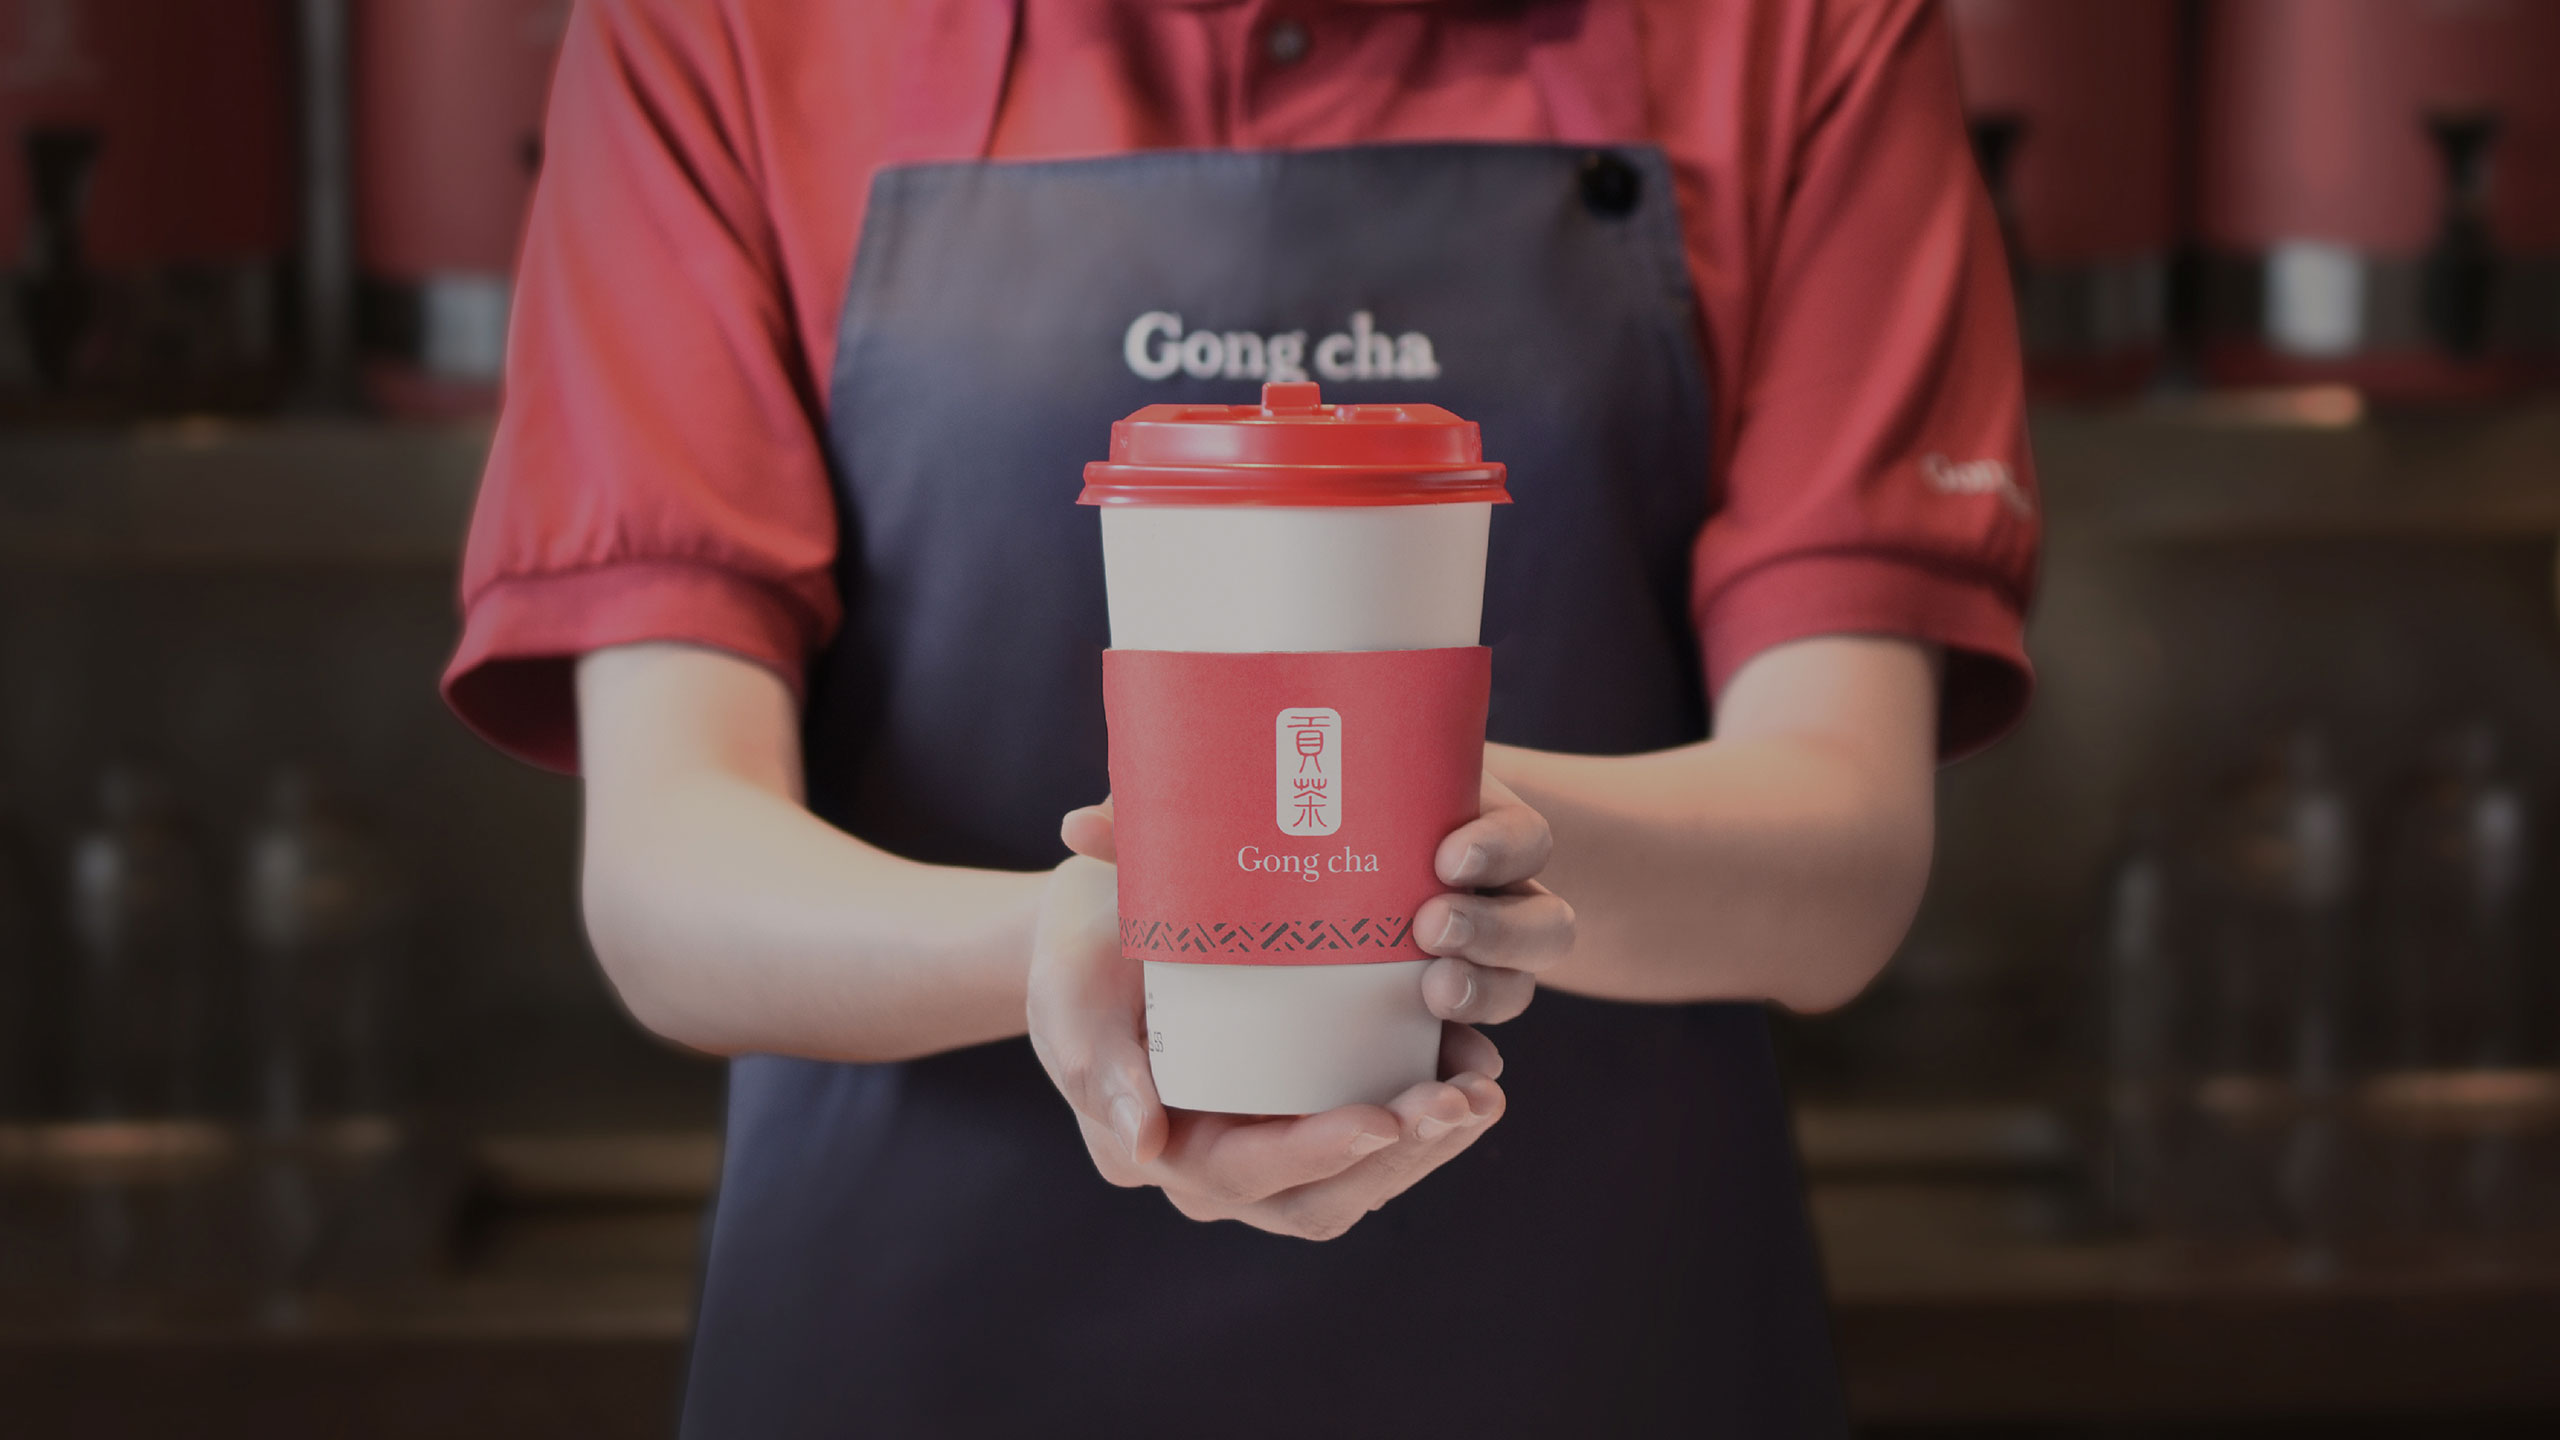 Server holding out Gong cha cup